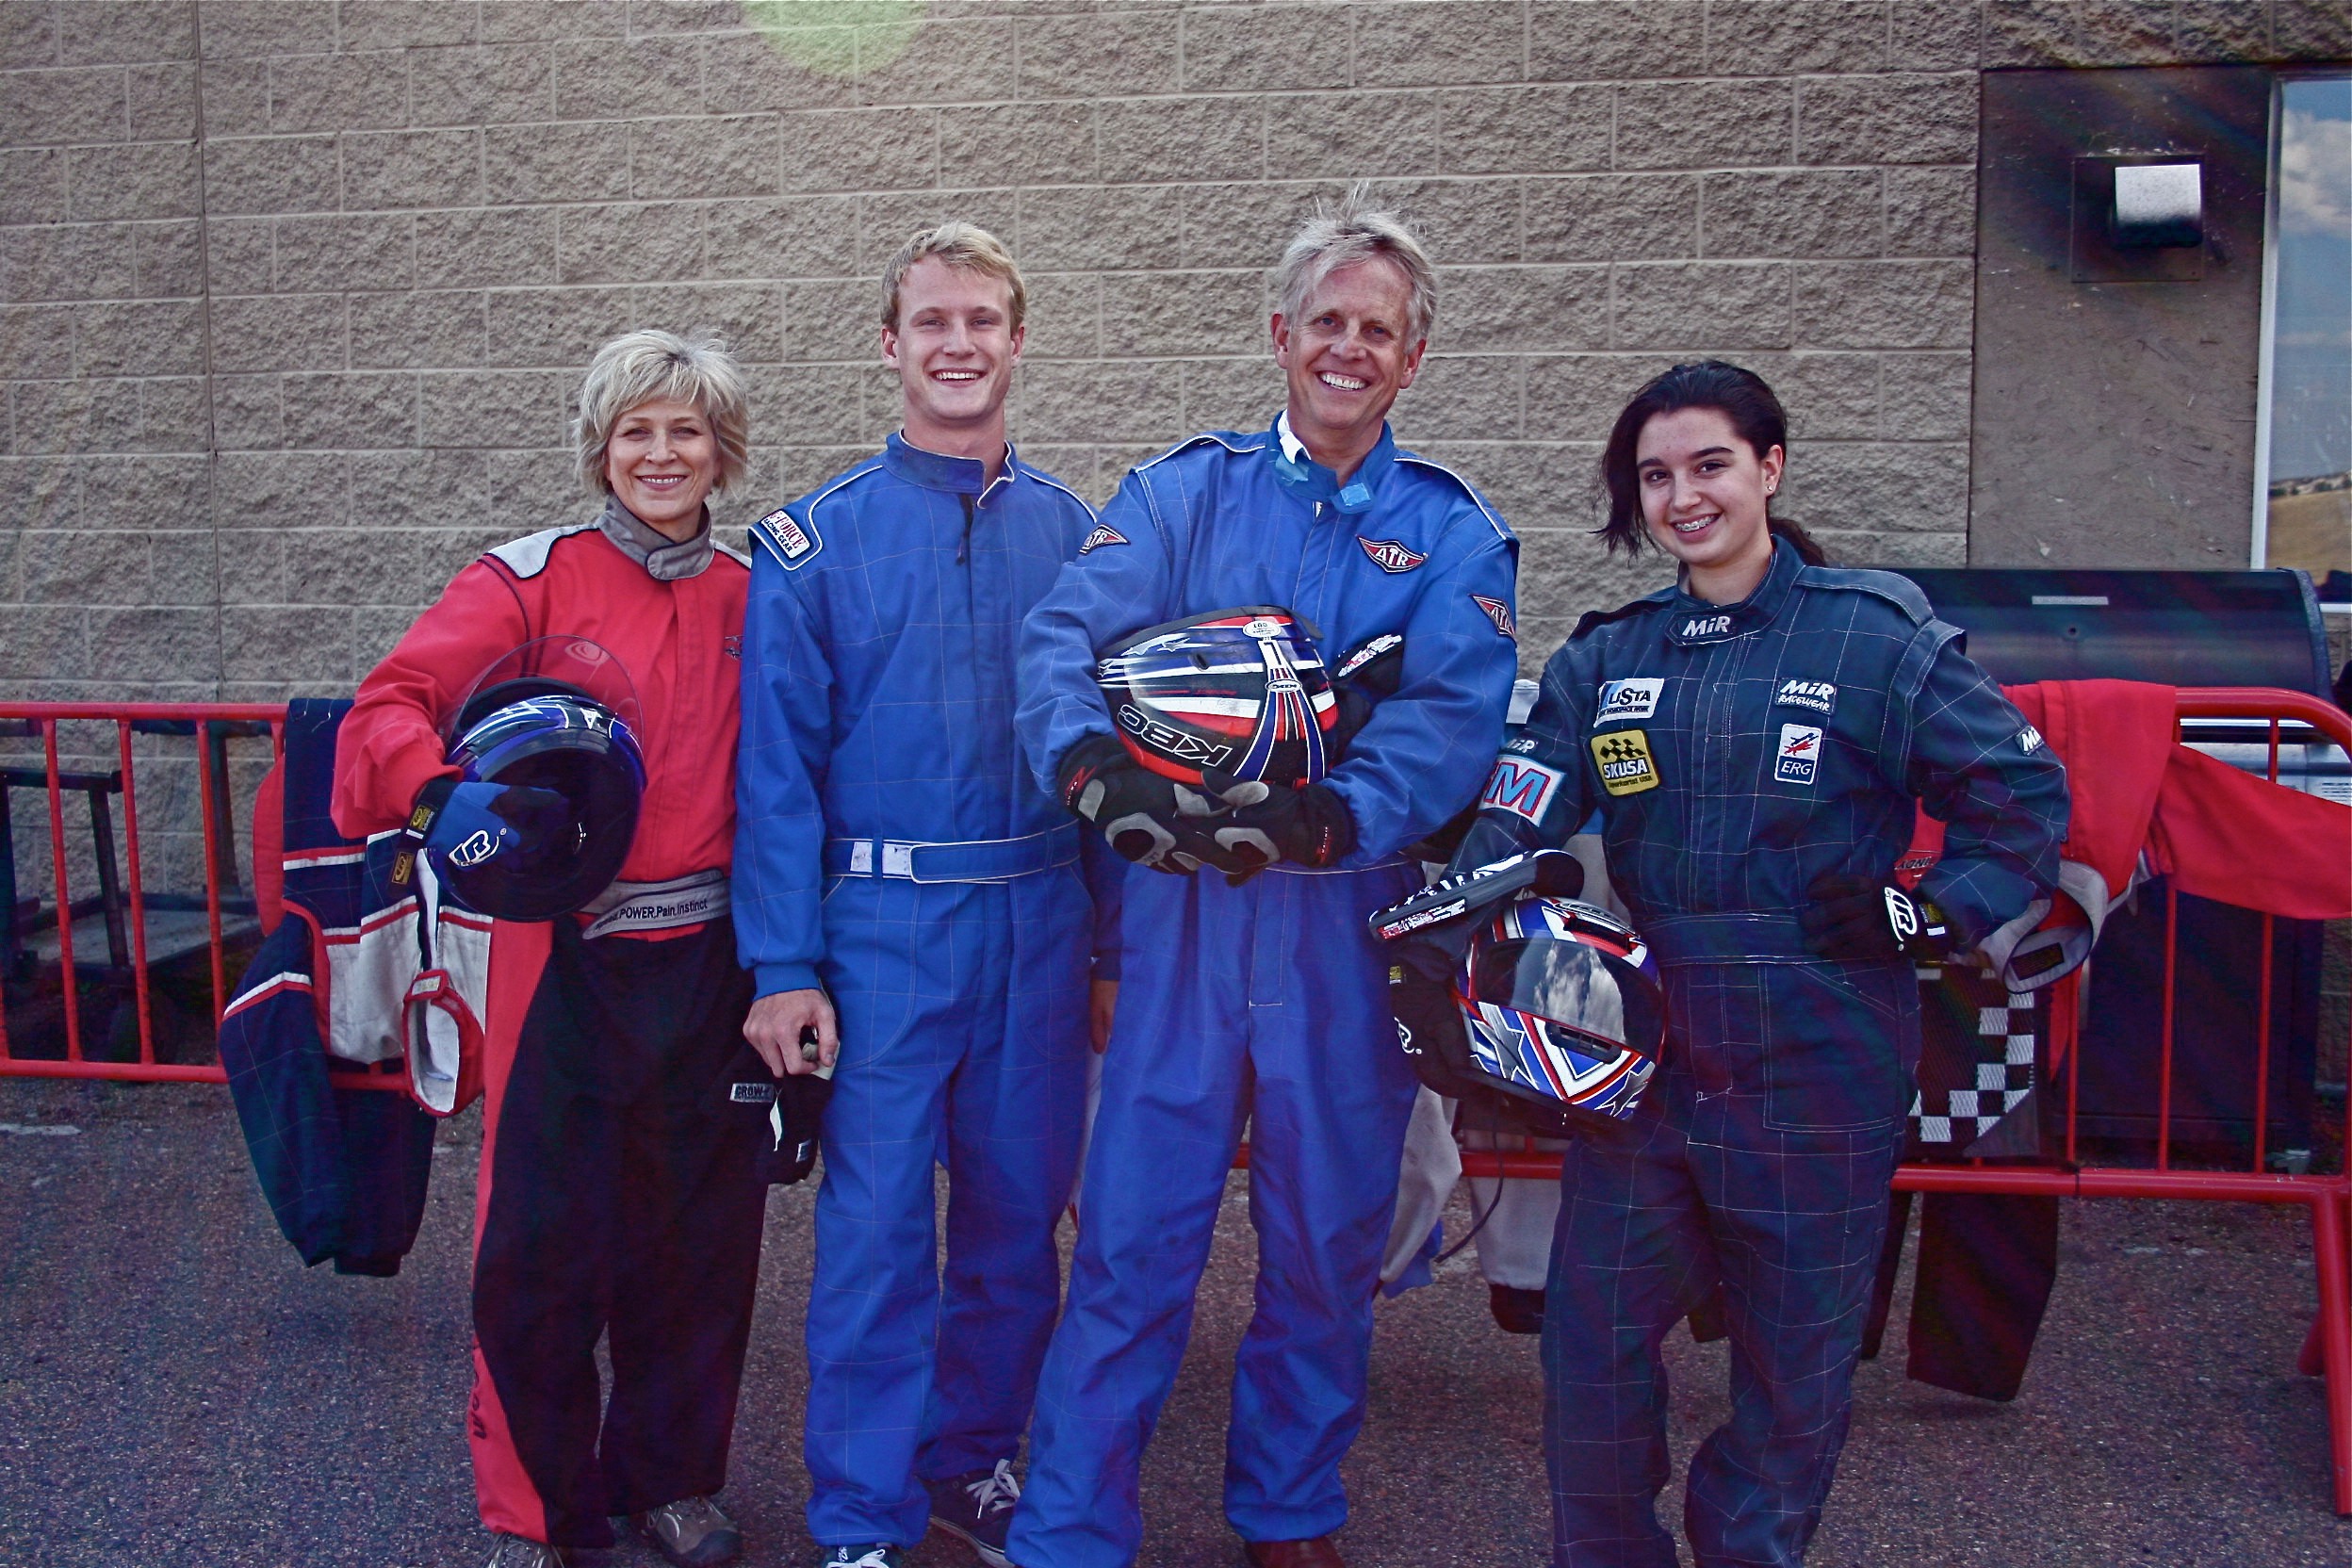 Scott Tibbitts and his family practicing focused driving